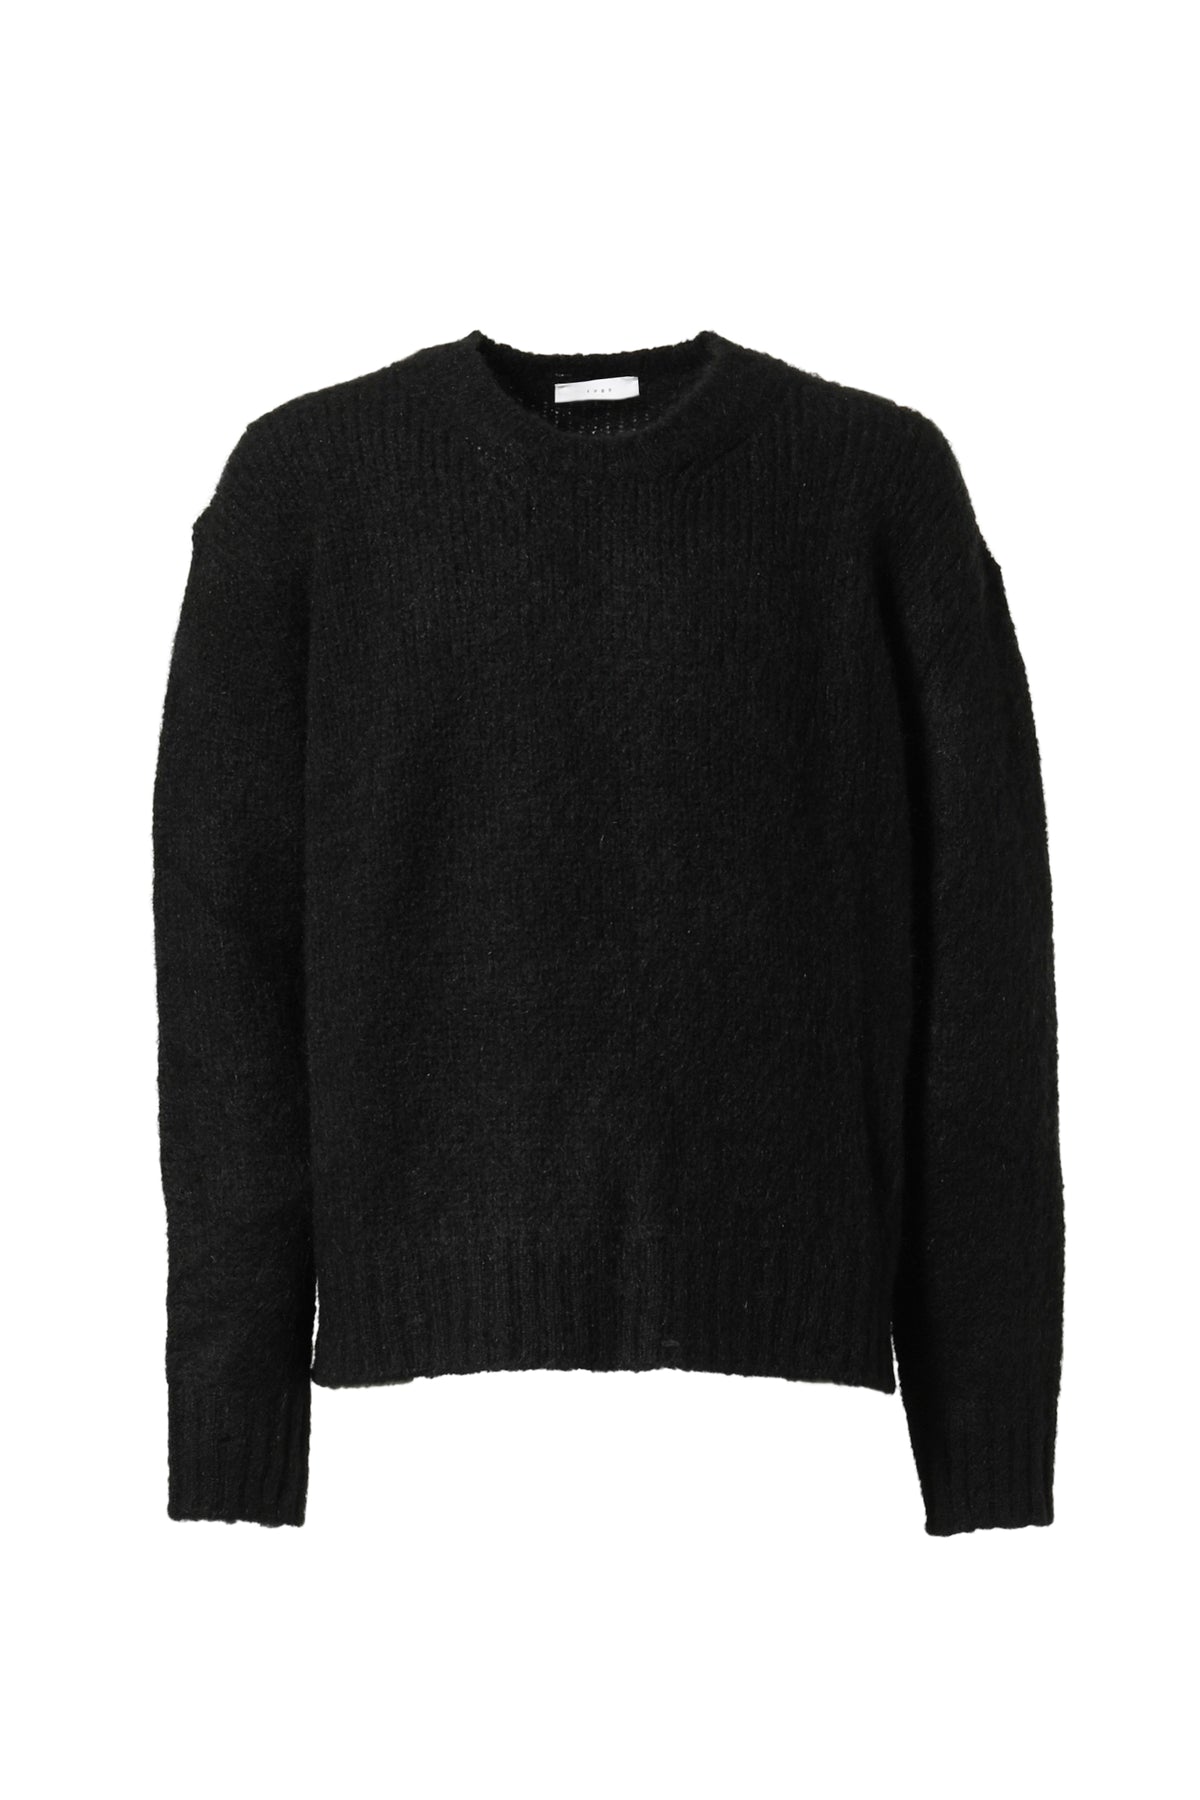 1989 OVERSIZED CROPPED CABLE SWEATER / BLK